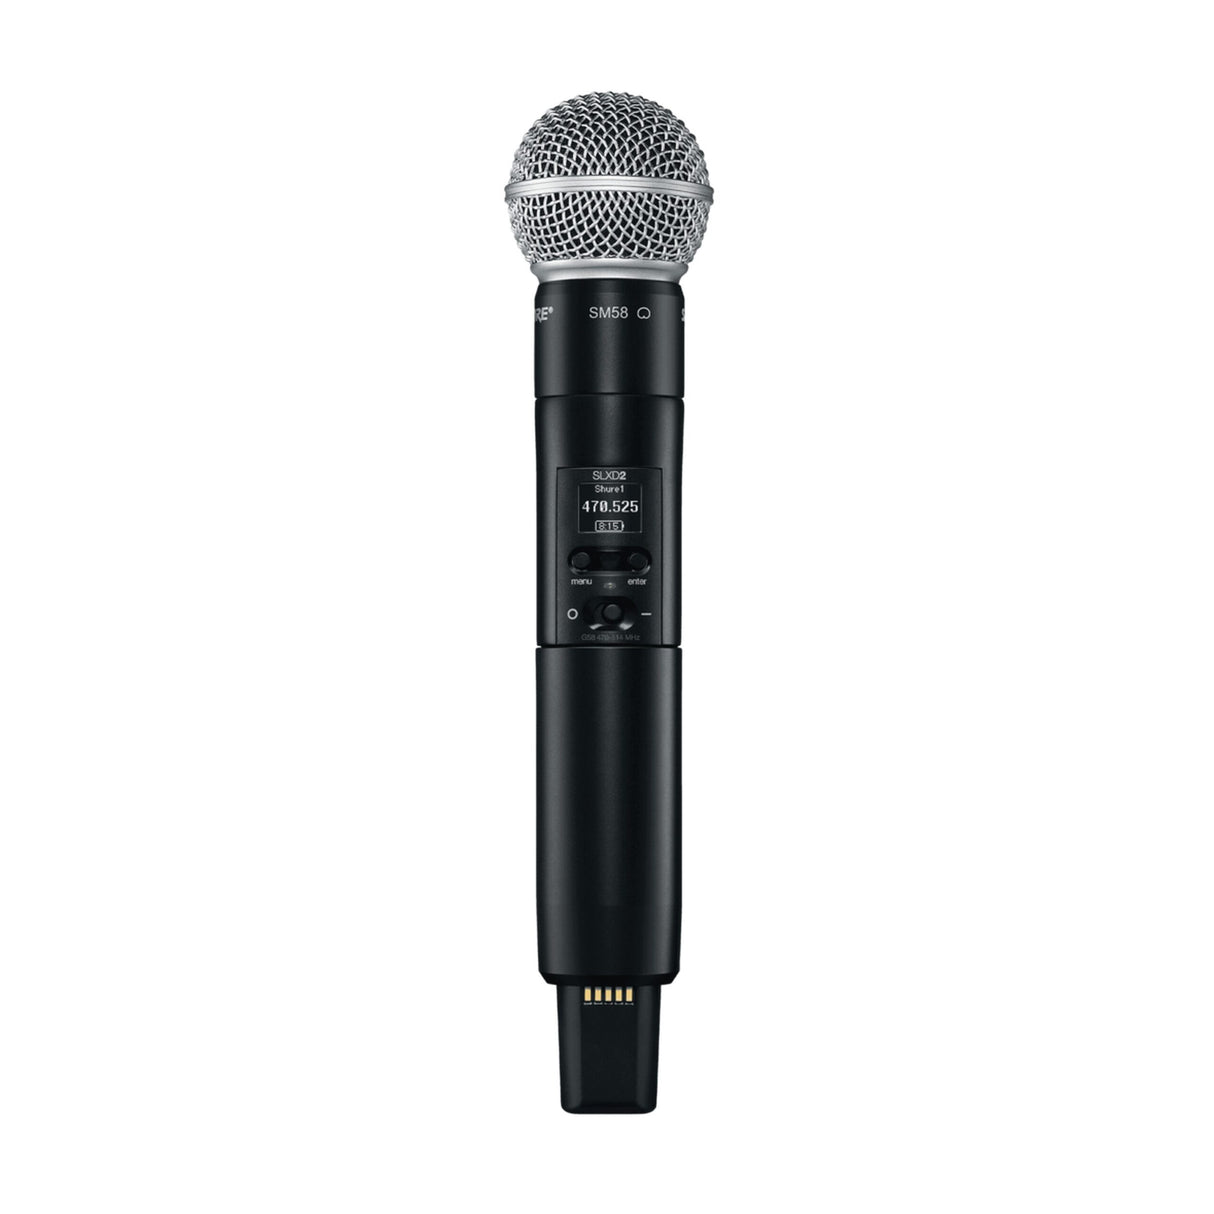 Shure SLXD2/SM58 Wireless Handheld Microphone Transmitter with SM58 Capsule, H55: 514-558 MHz